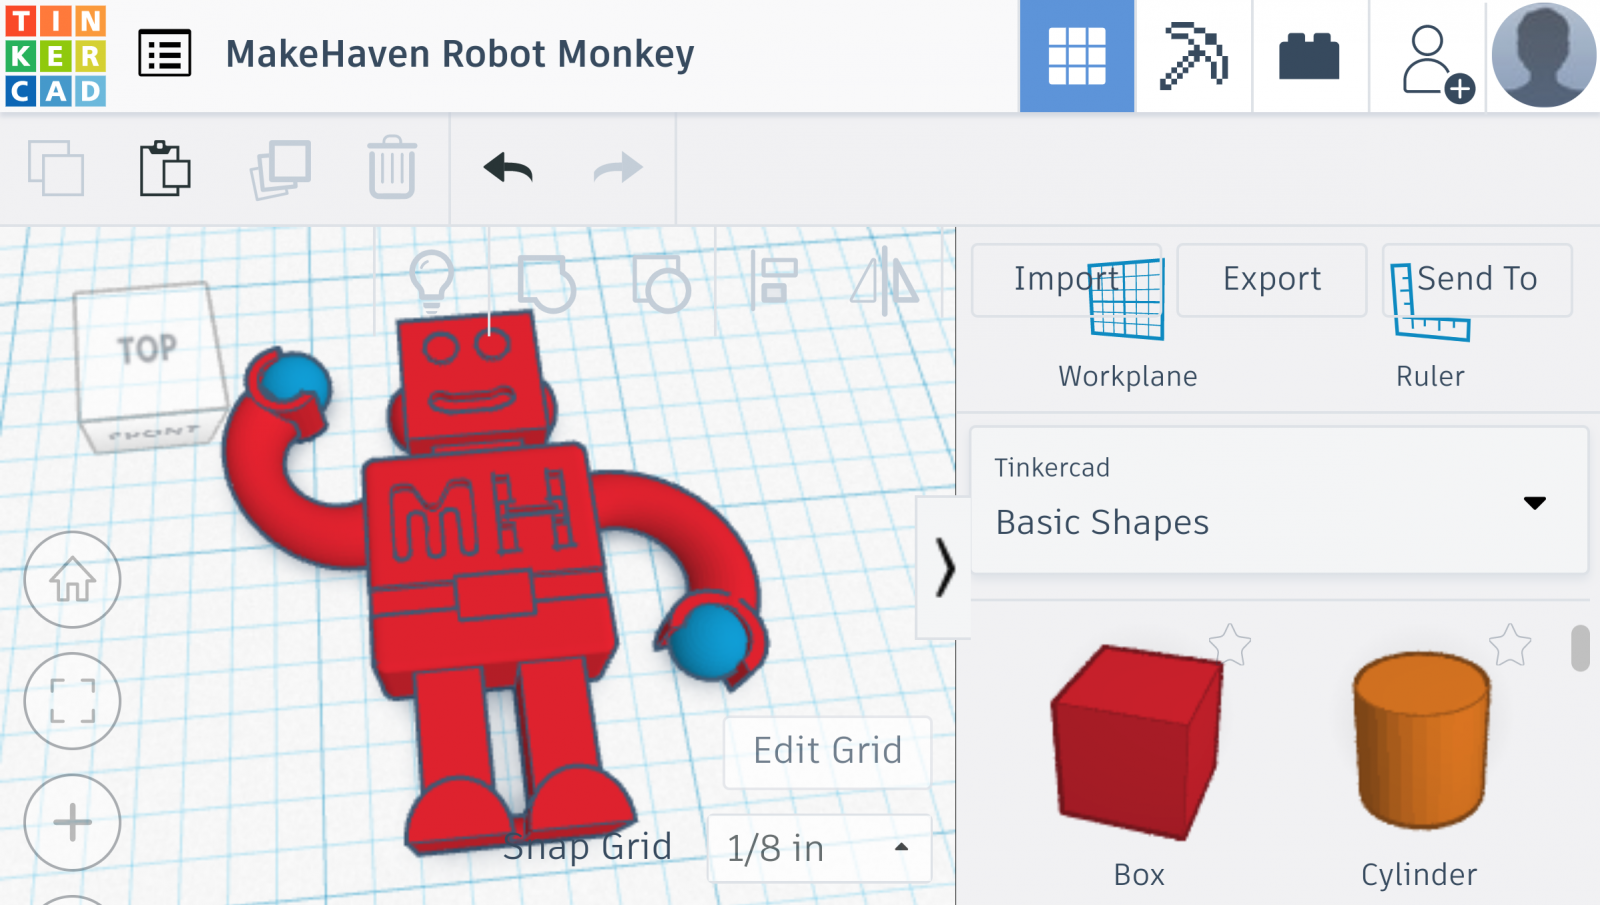 liter projektor flydende Getting to Know Tinkercad for 3d Printing | MakeHaven